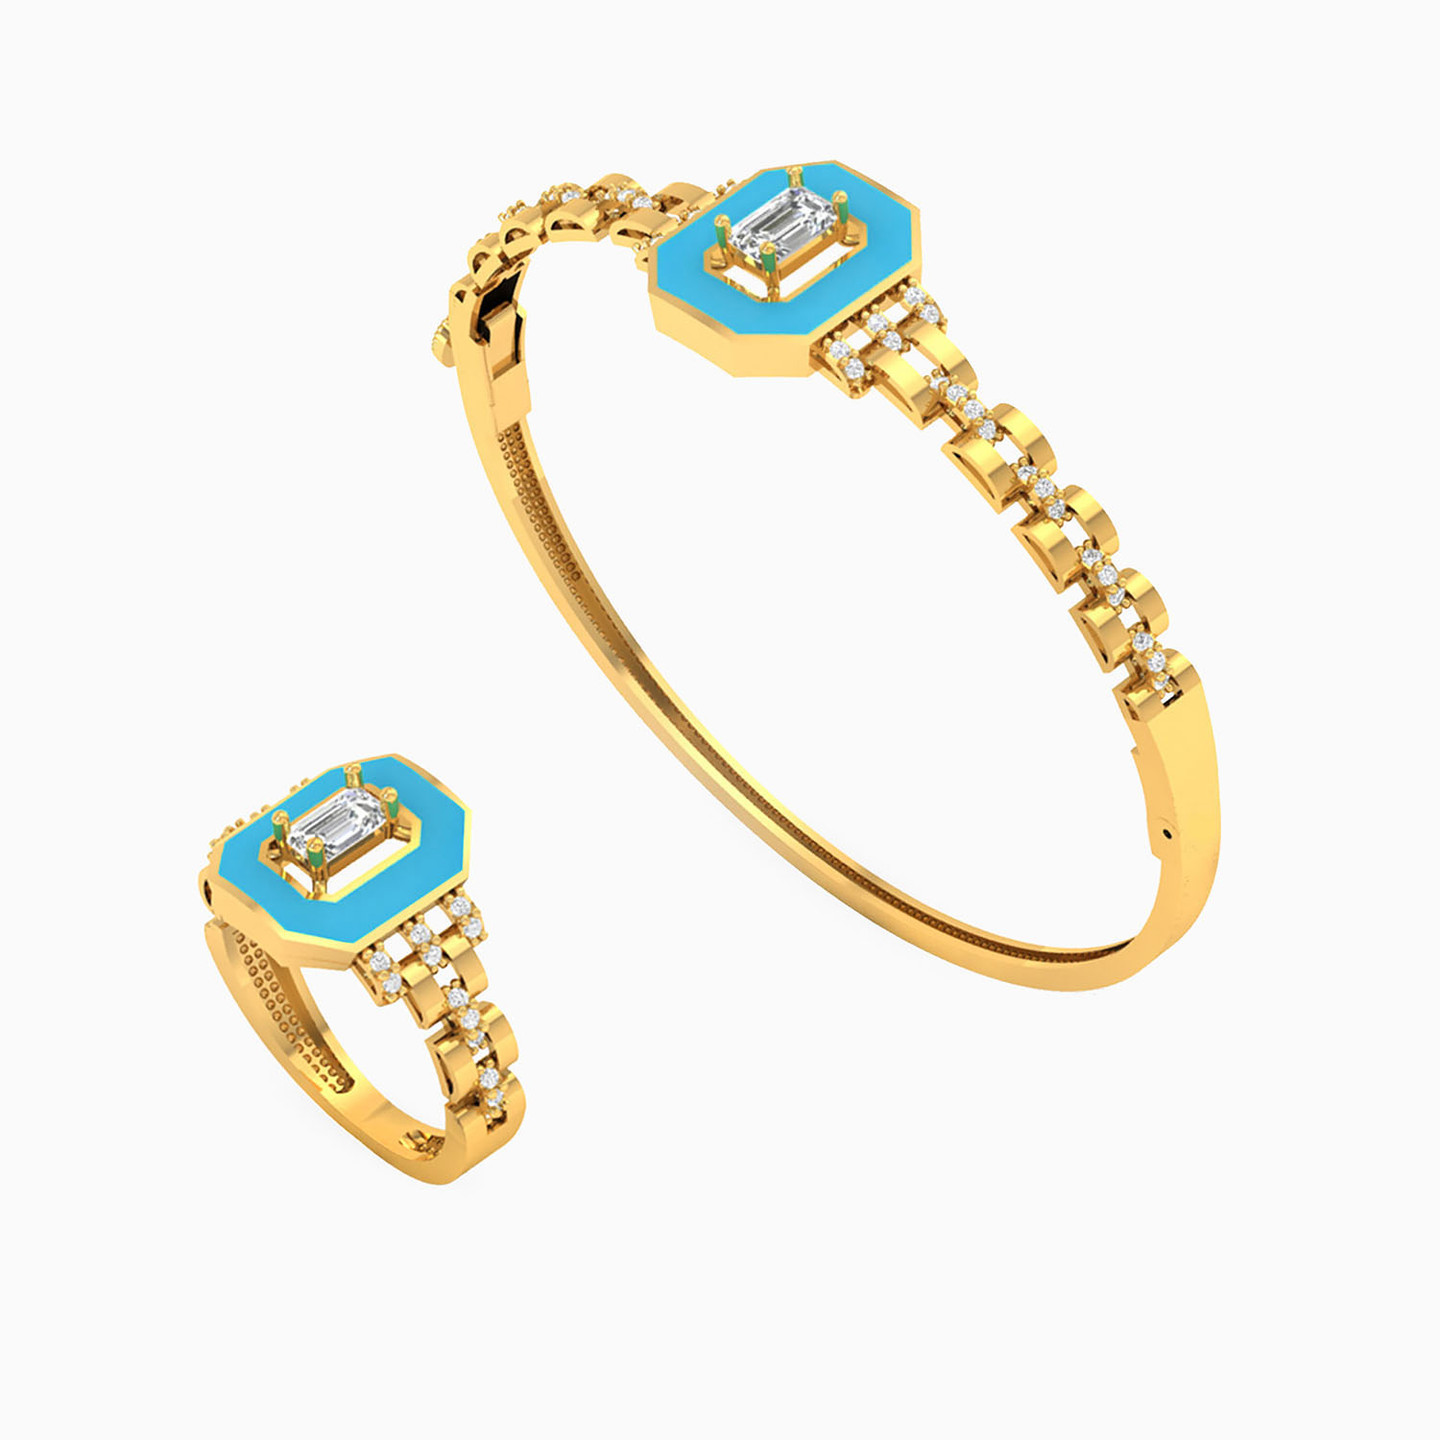 18K Gold Colored Stones & Enamel Coated Bangle & Ring Jewelry Set - 2 Pieces